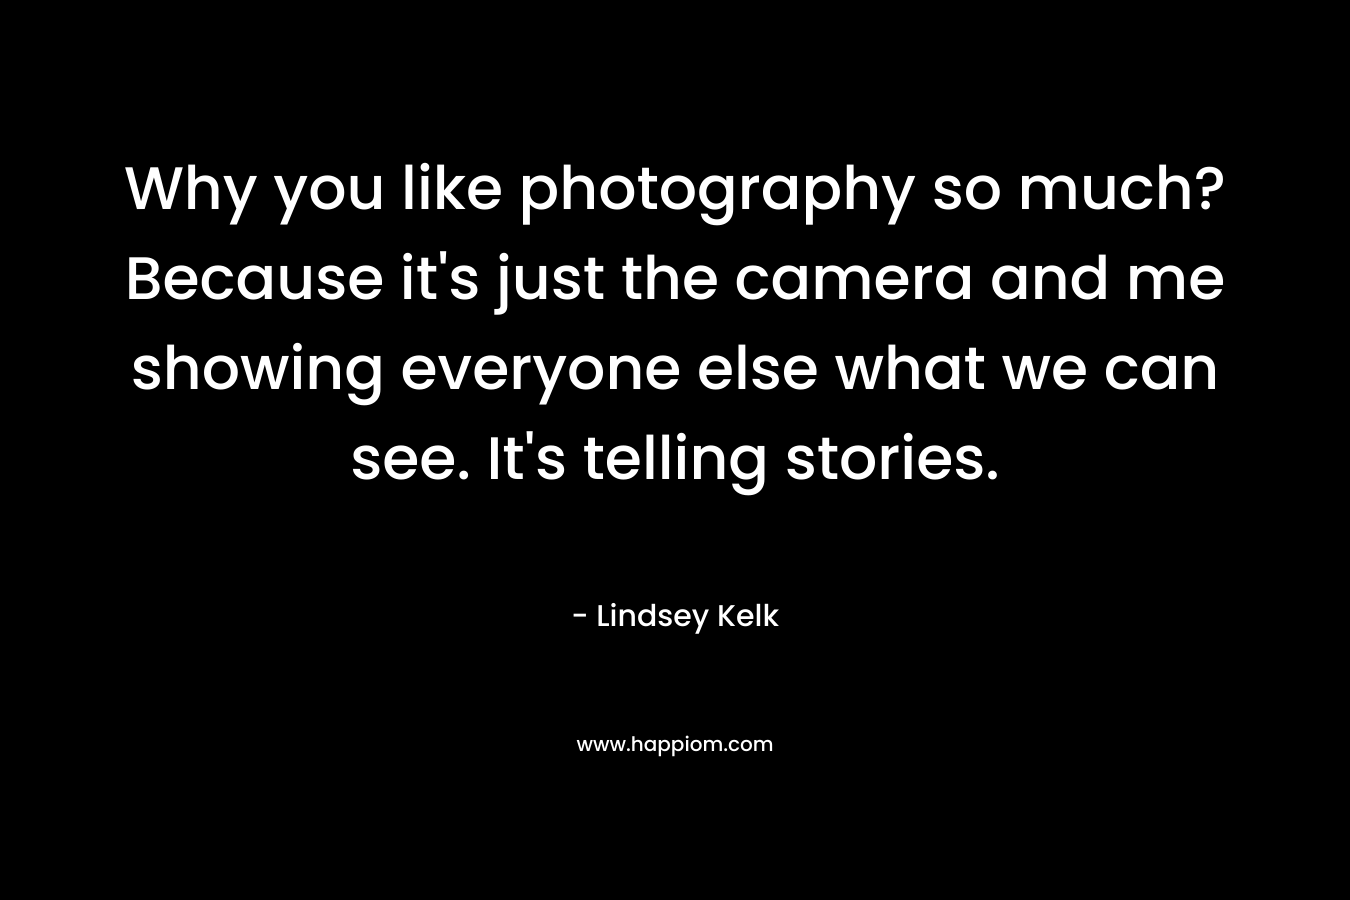 Why you like photography so much? Because it’s just the camera and me showing everyone else what we can see. It’s telling stories. – Lindsey Kelk